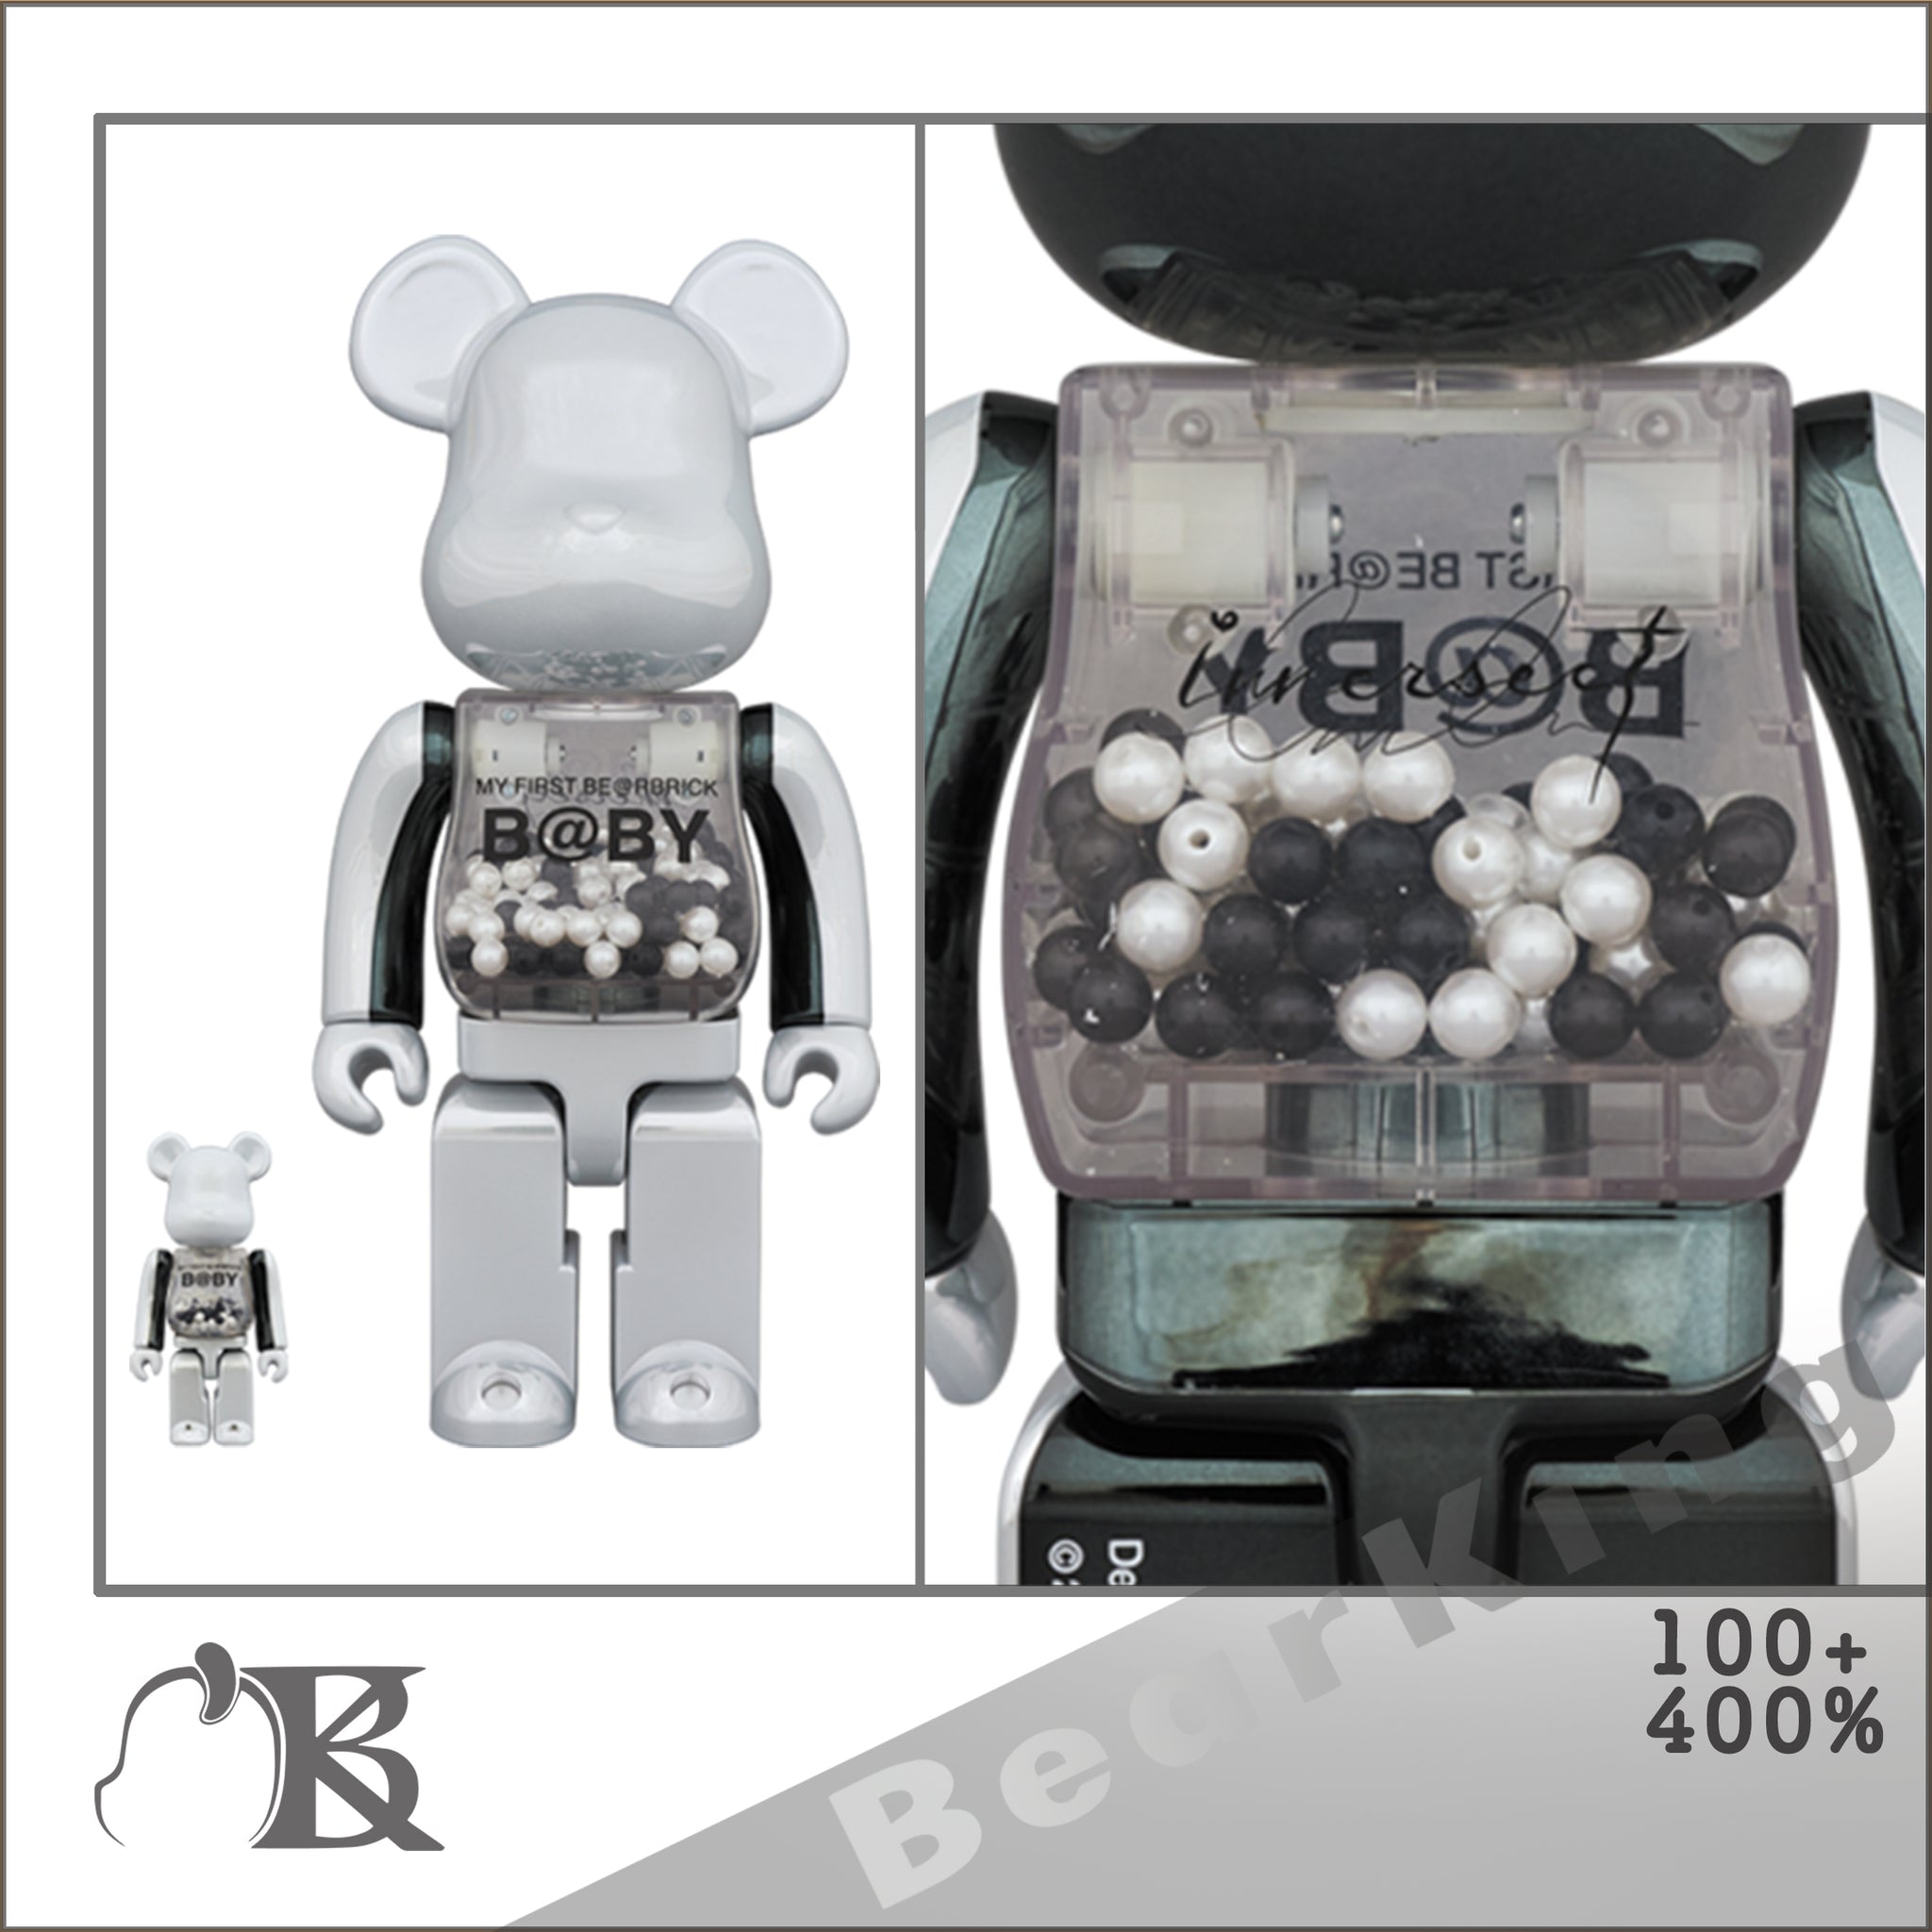 MY FIRST BE@RBRICK B@BY innersect Ver. 100％ ＆ 400％ 千秋Baby 黑白